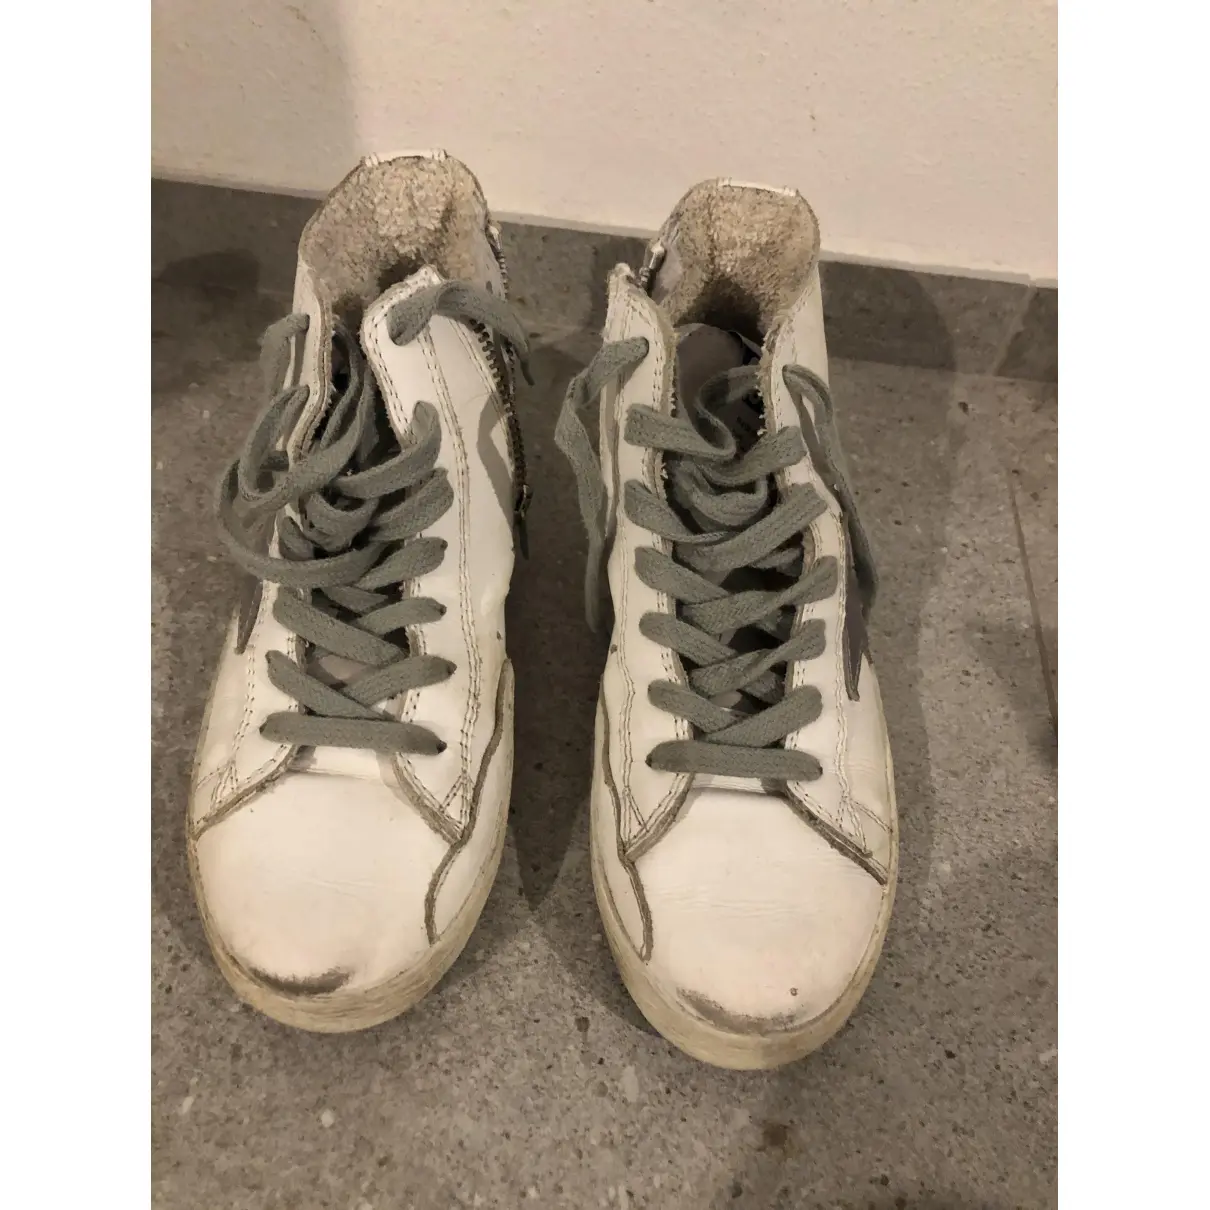 Buy Golden Goose Leather trainers online